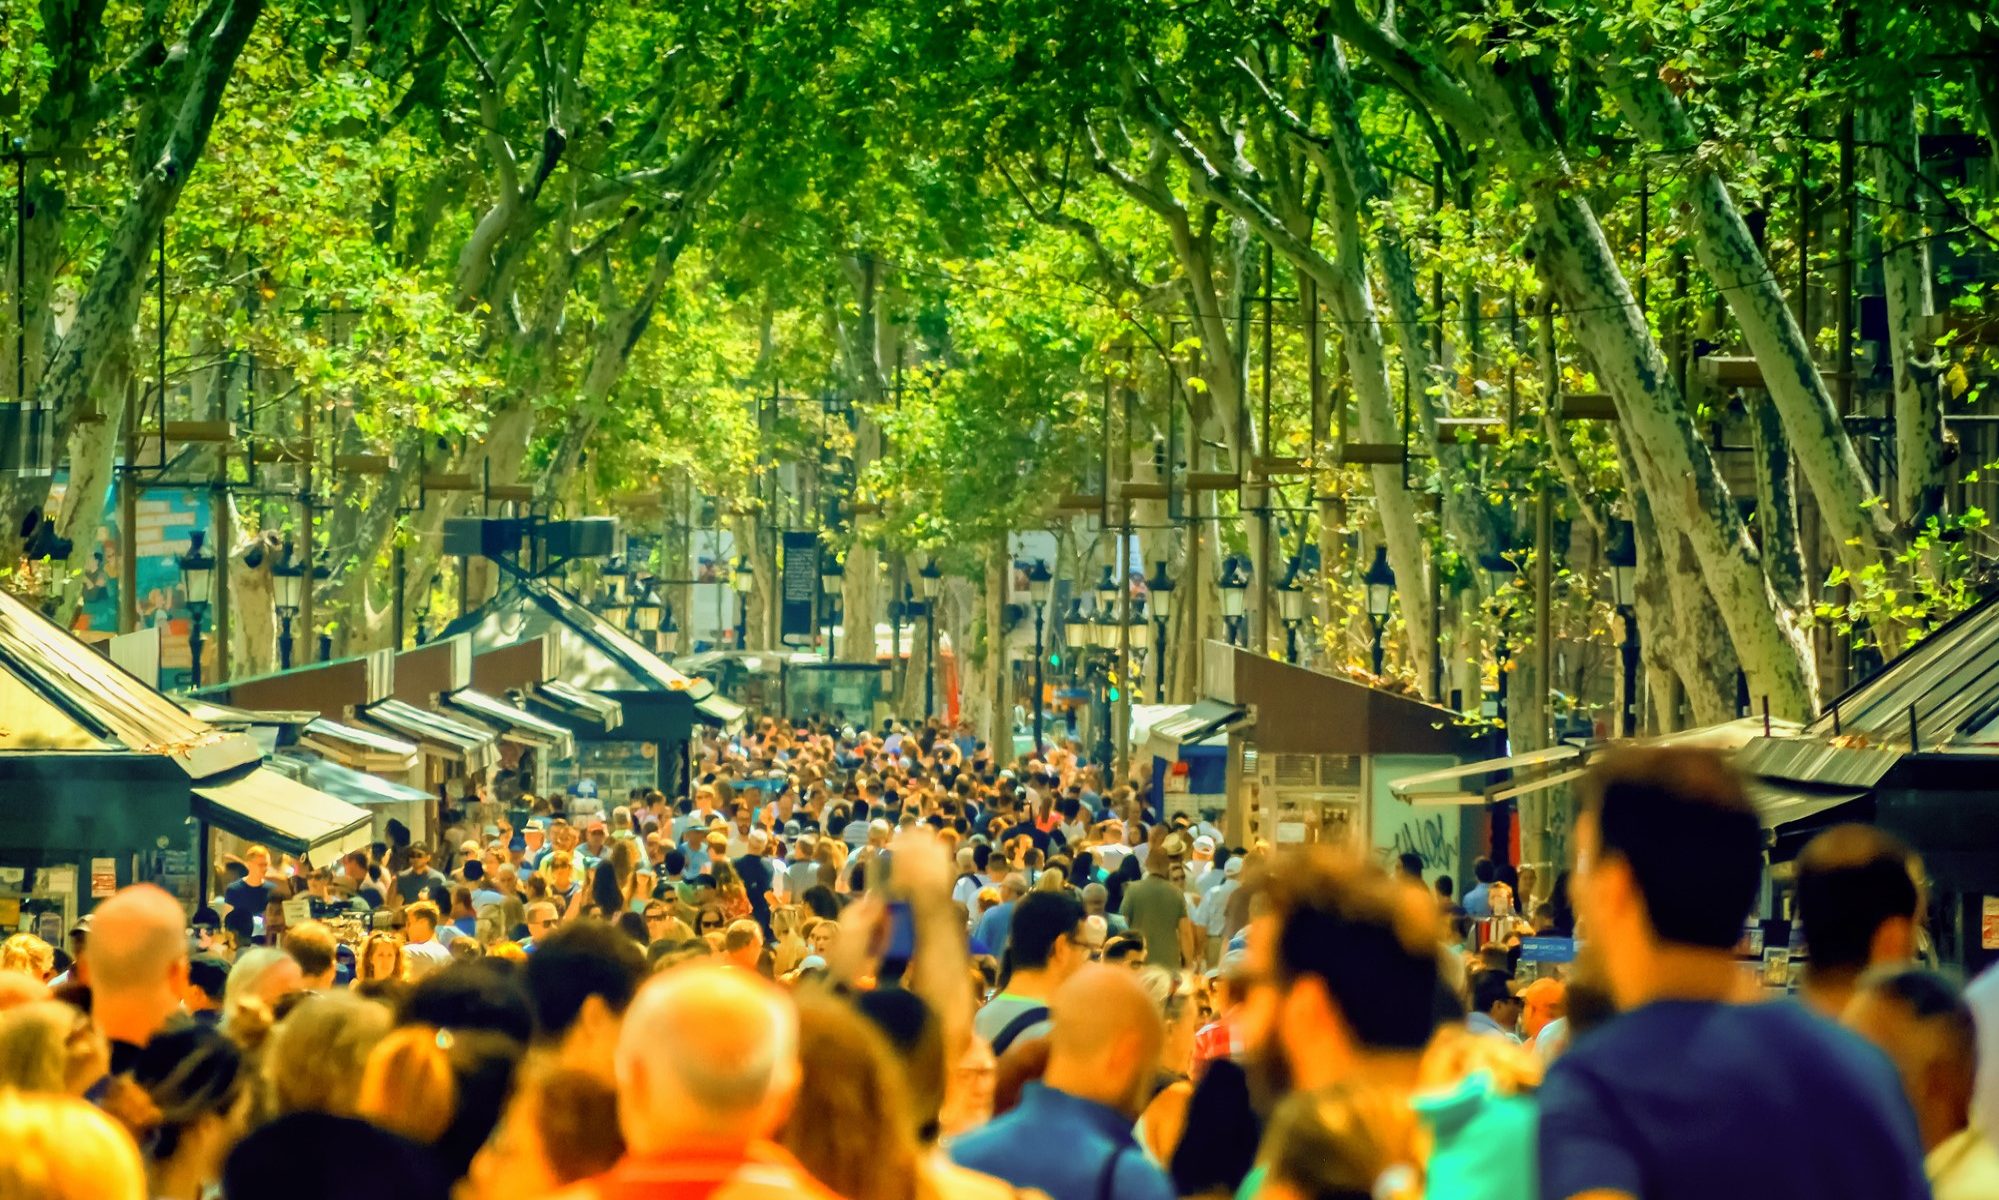 photograph of crowded market street in Barcelona